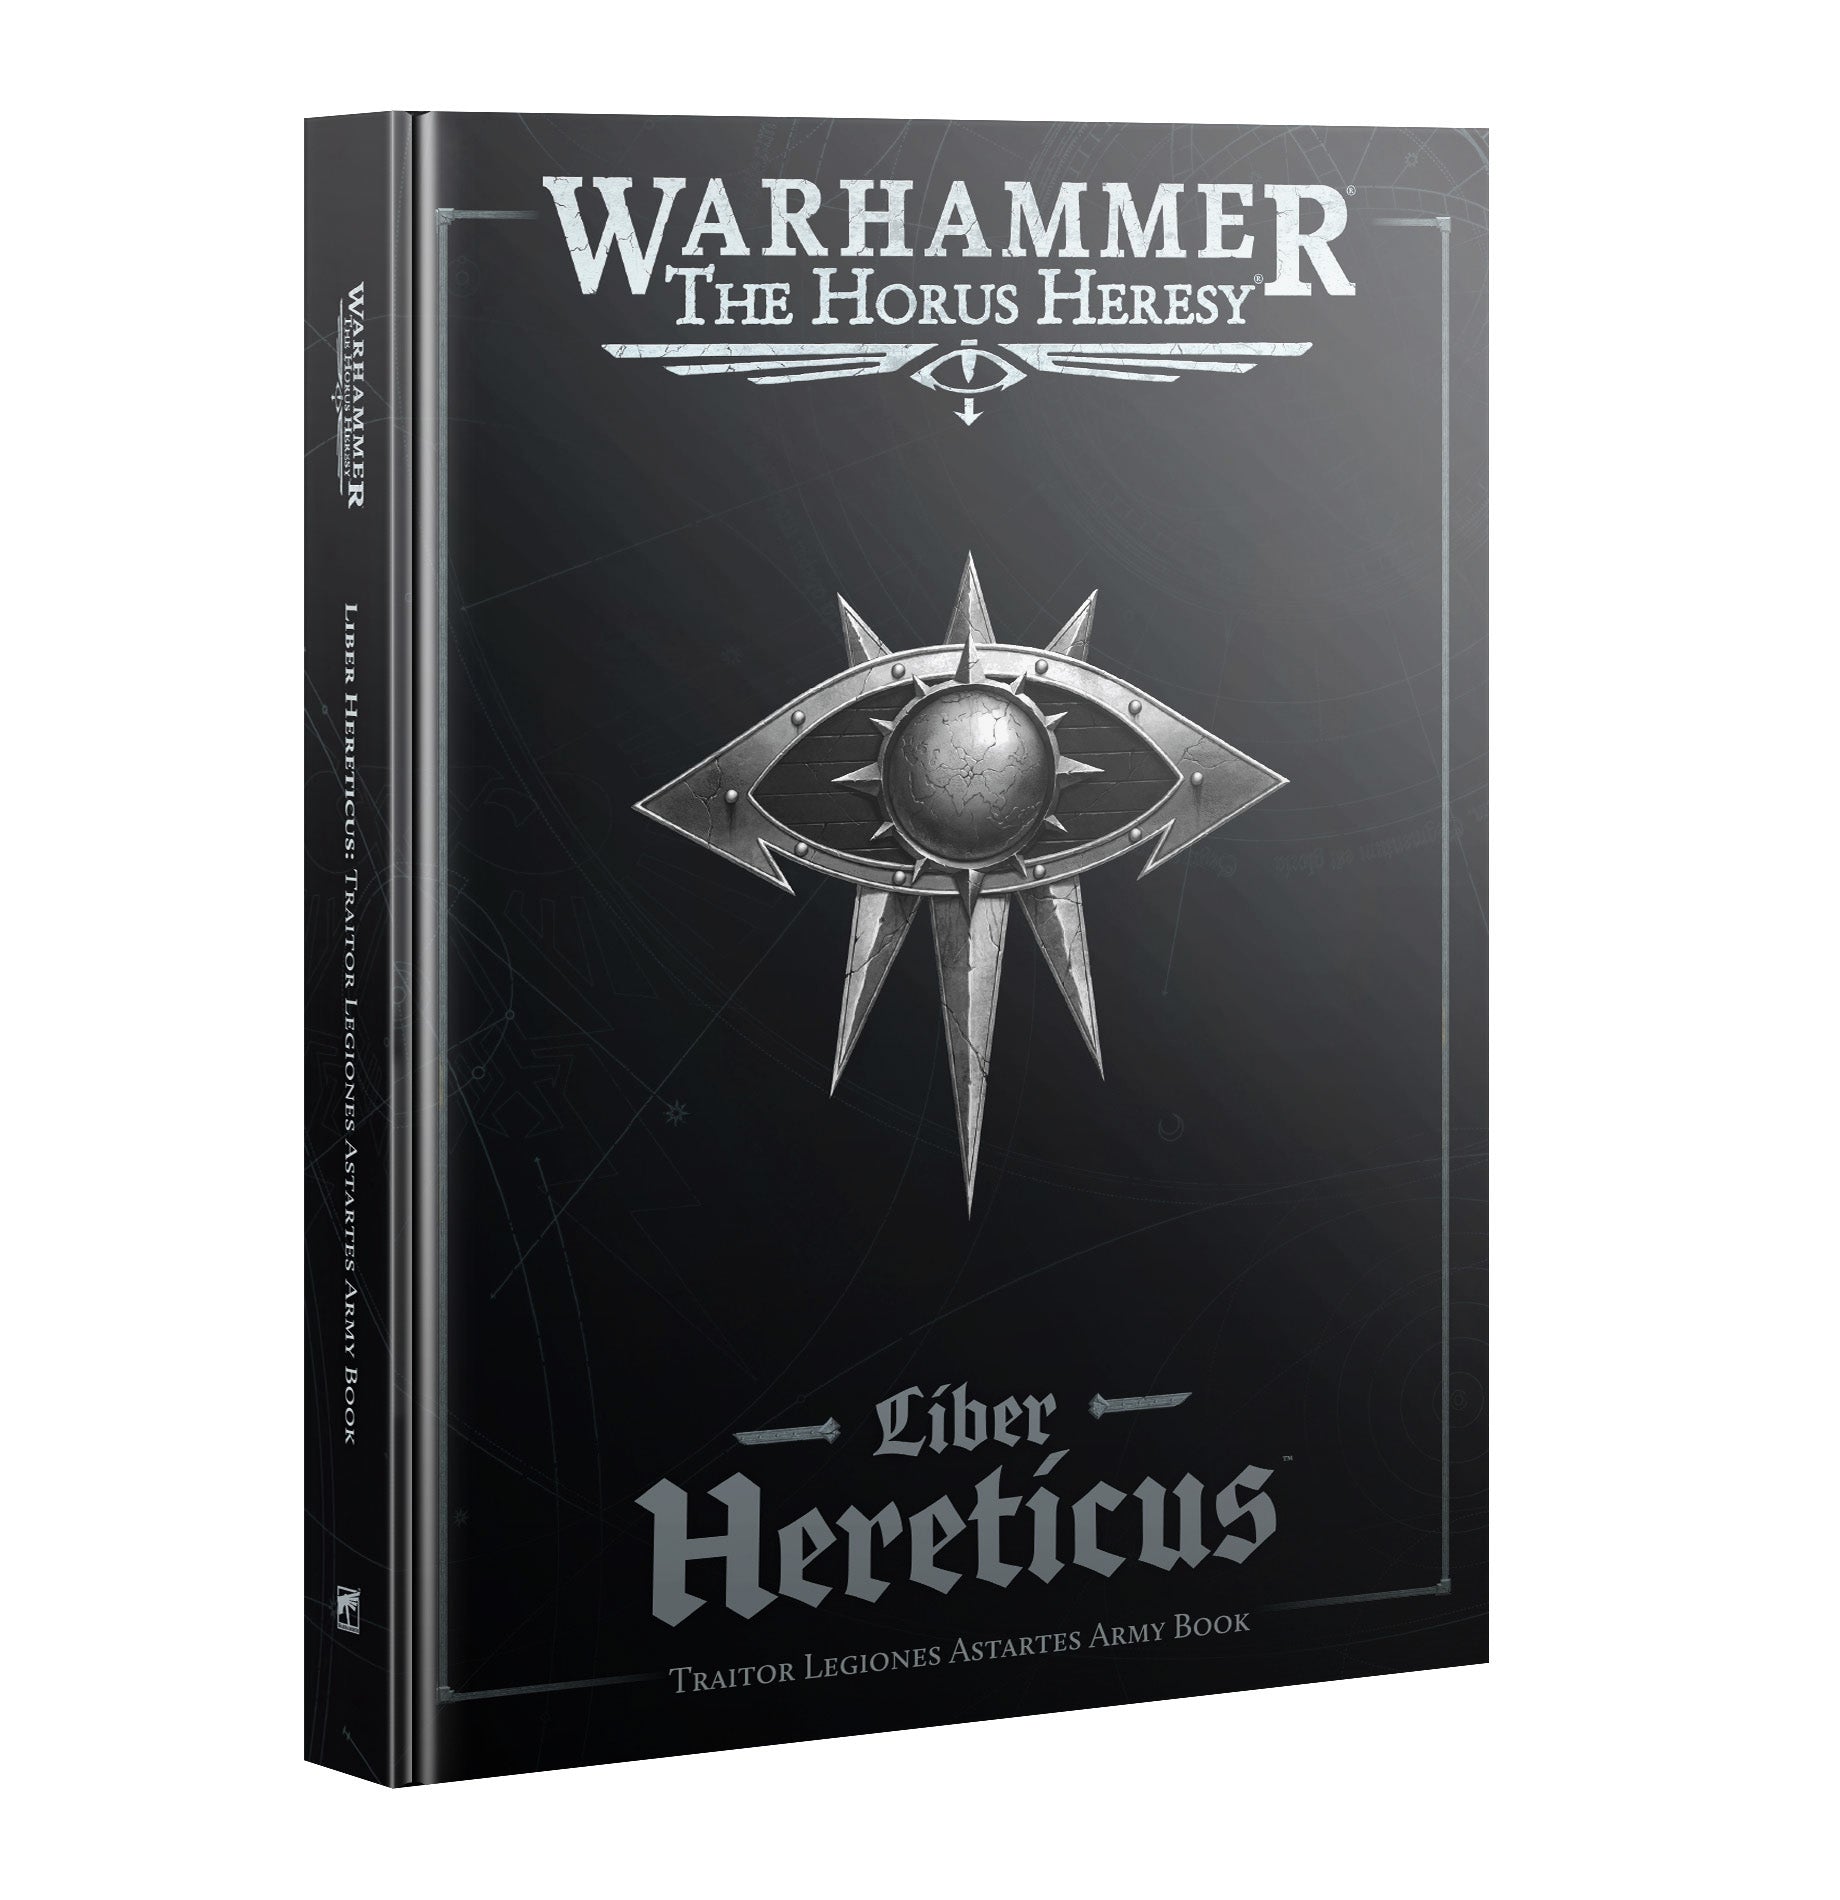 Horus Hersey: Liber Hereticus: Traitor Legiones Astartes Army Book | All About Games